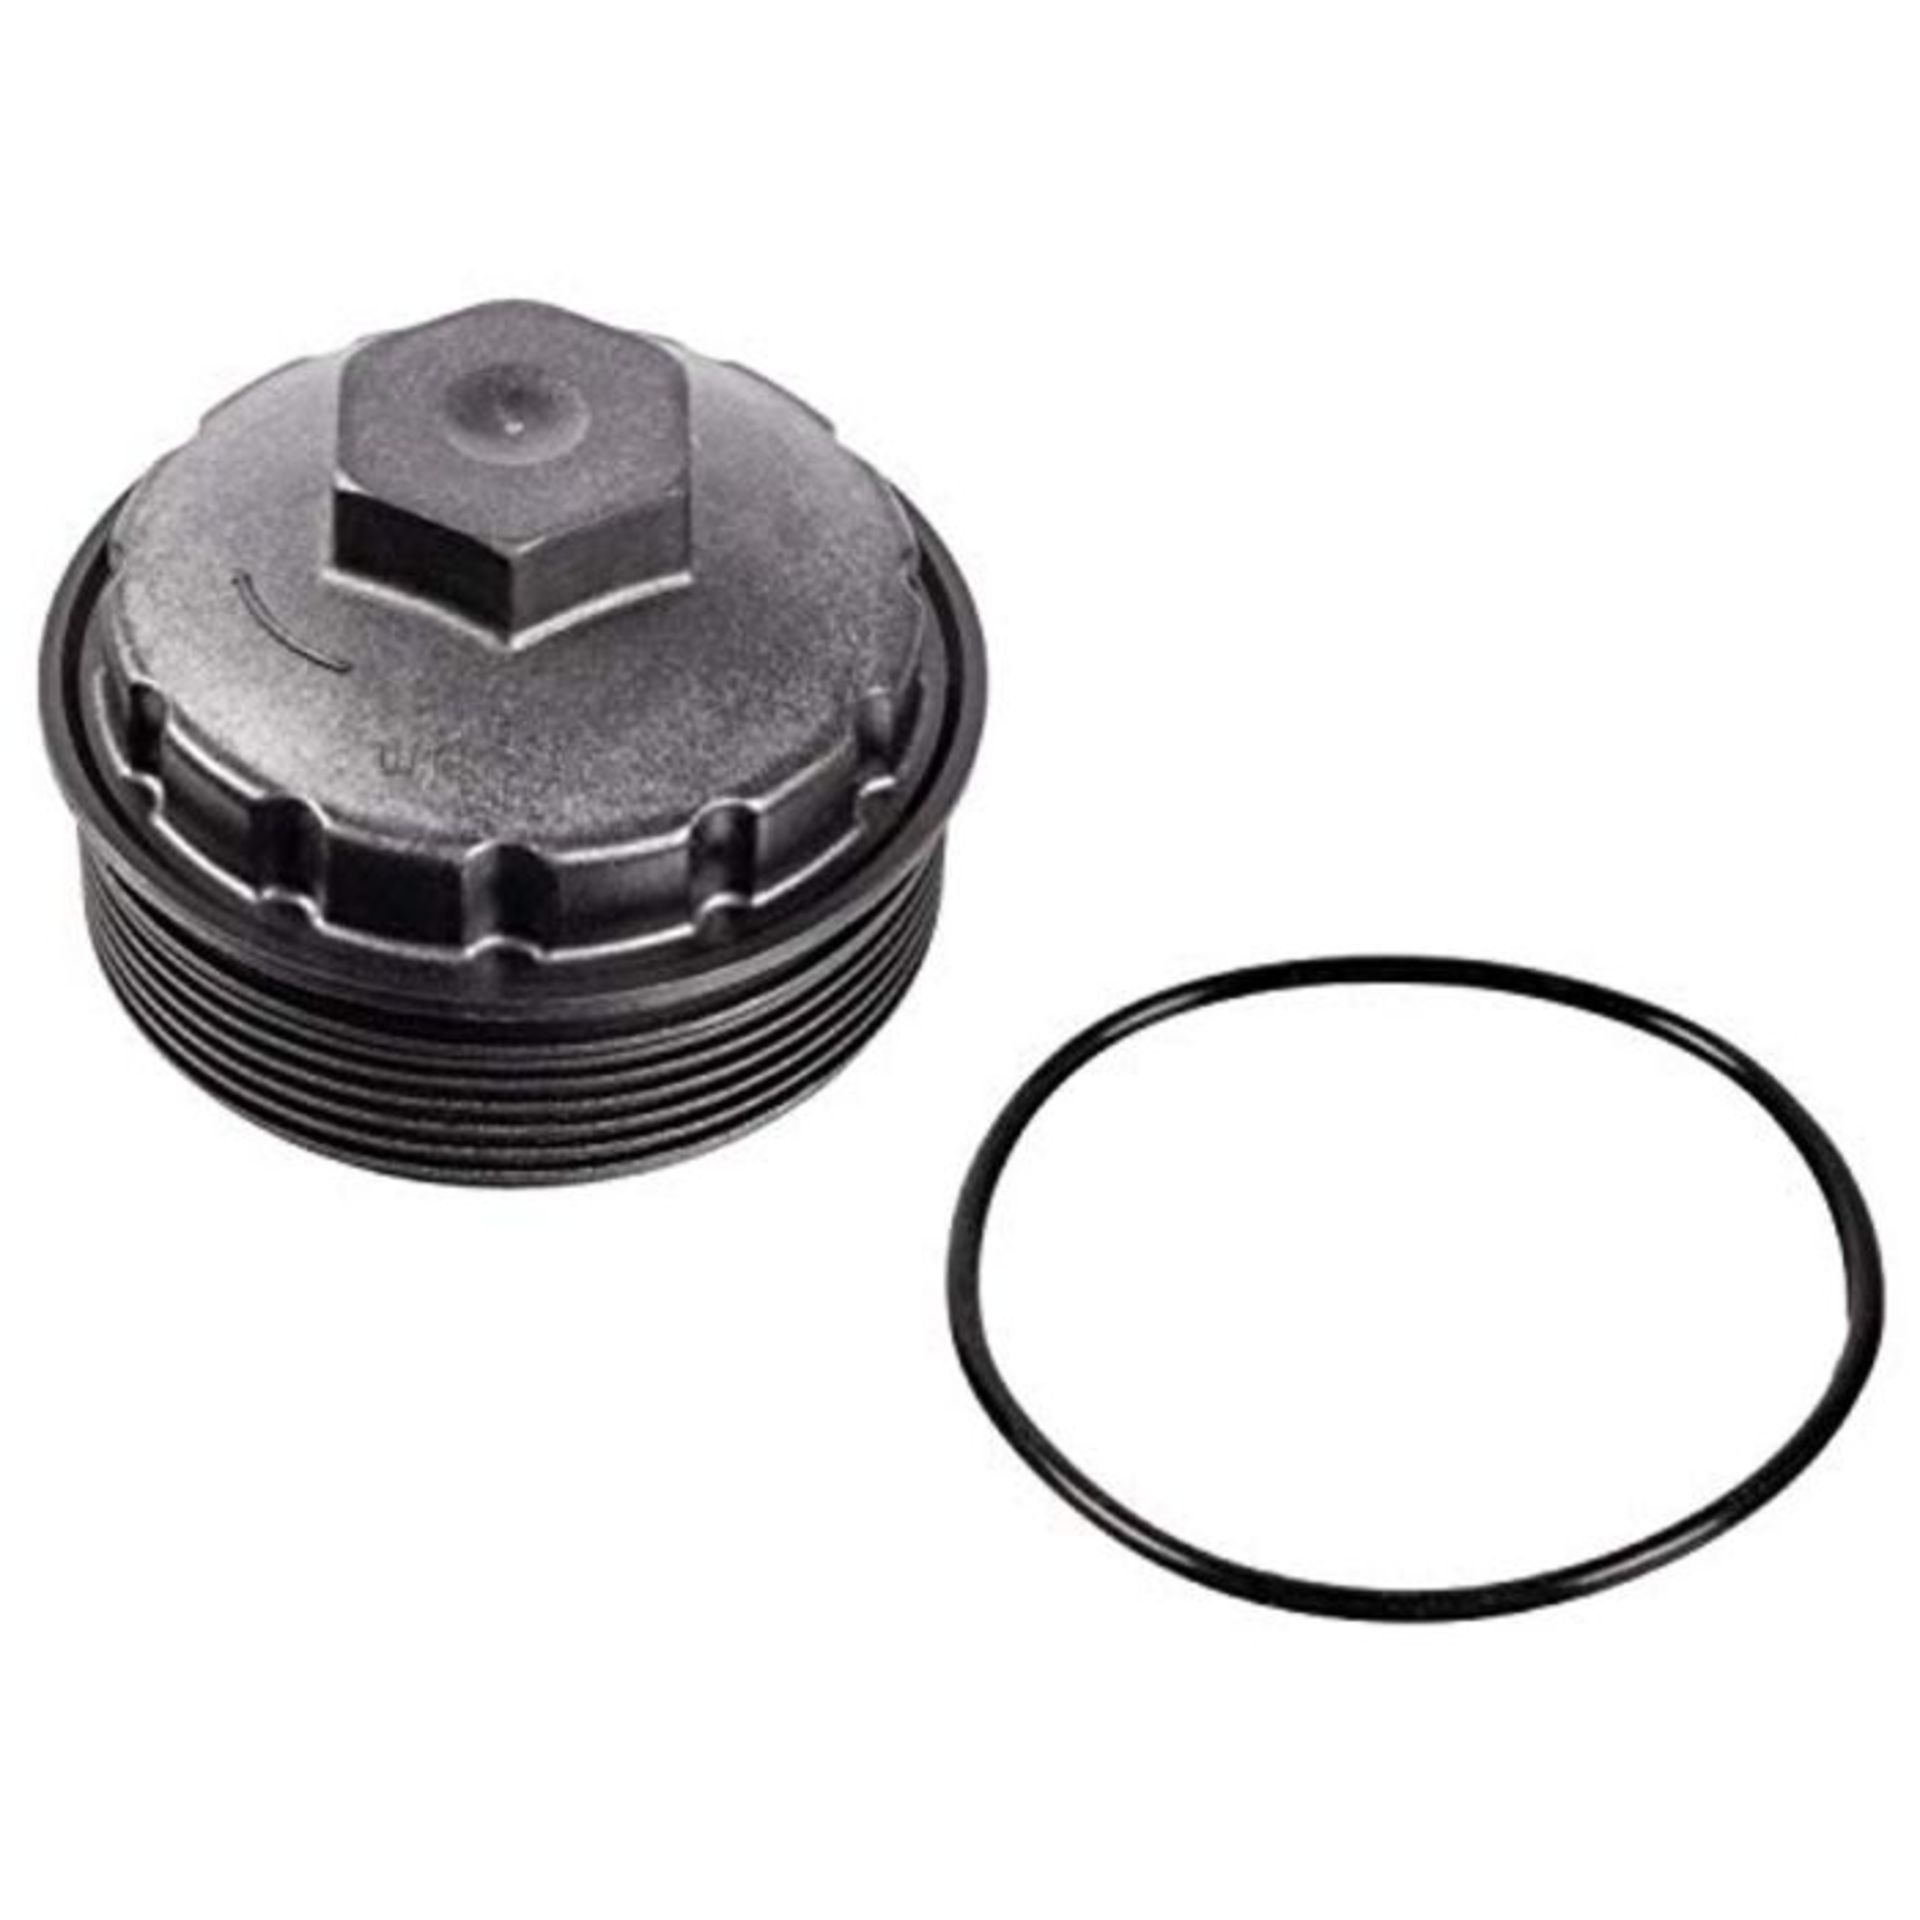 febi bilstein 39698 Cap for oil filter housing, with sealing ring, pack of one